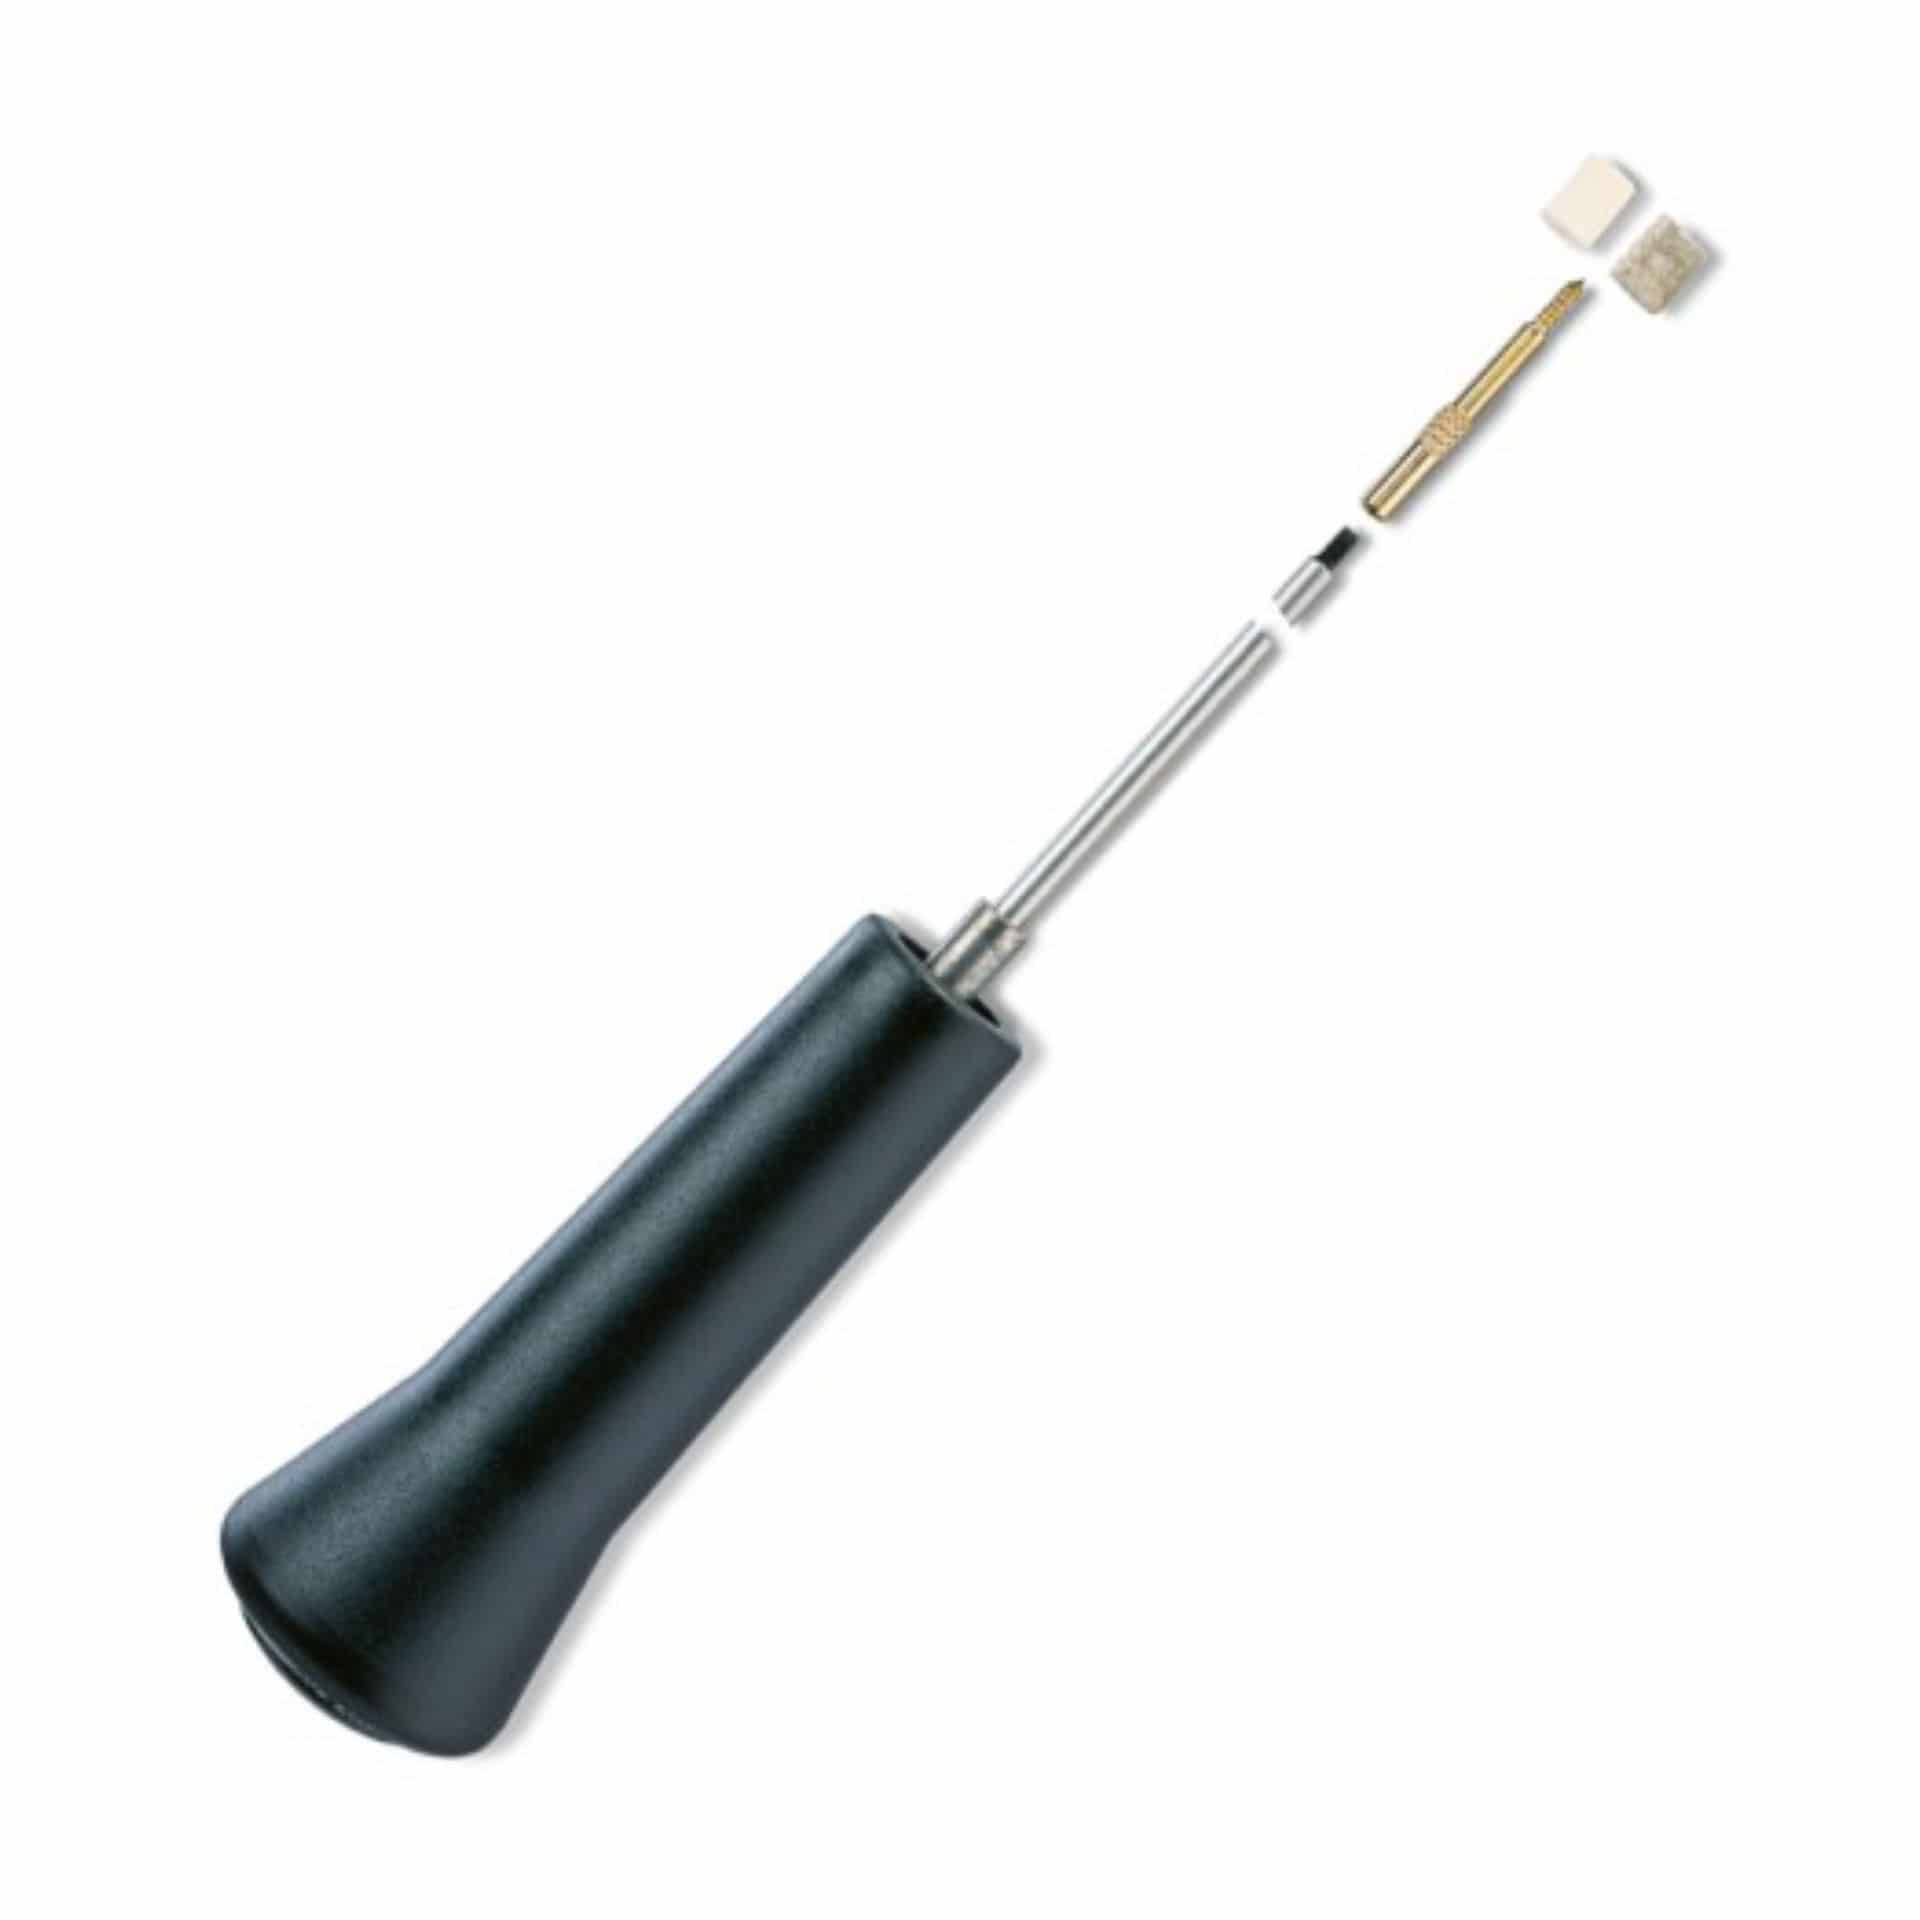 361324 VFG Cleaning Stick Stainless Stell Long 740 mm incl. adapter 66803, 4–5,5 mm